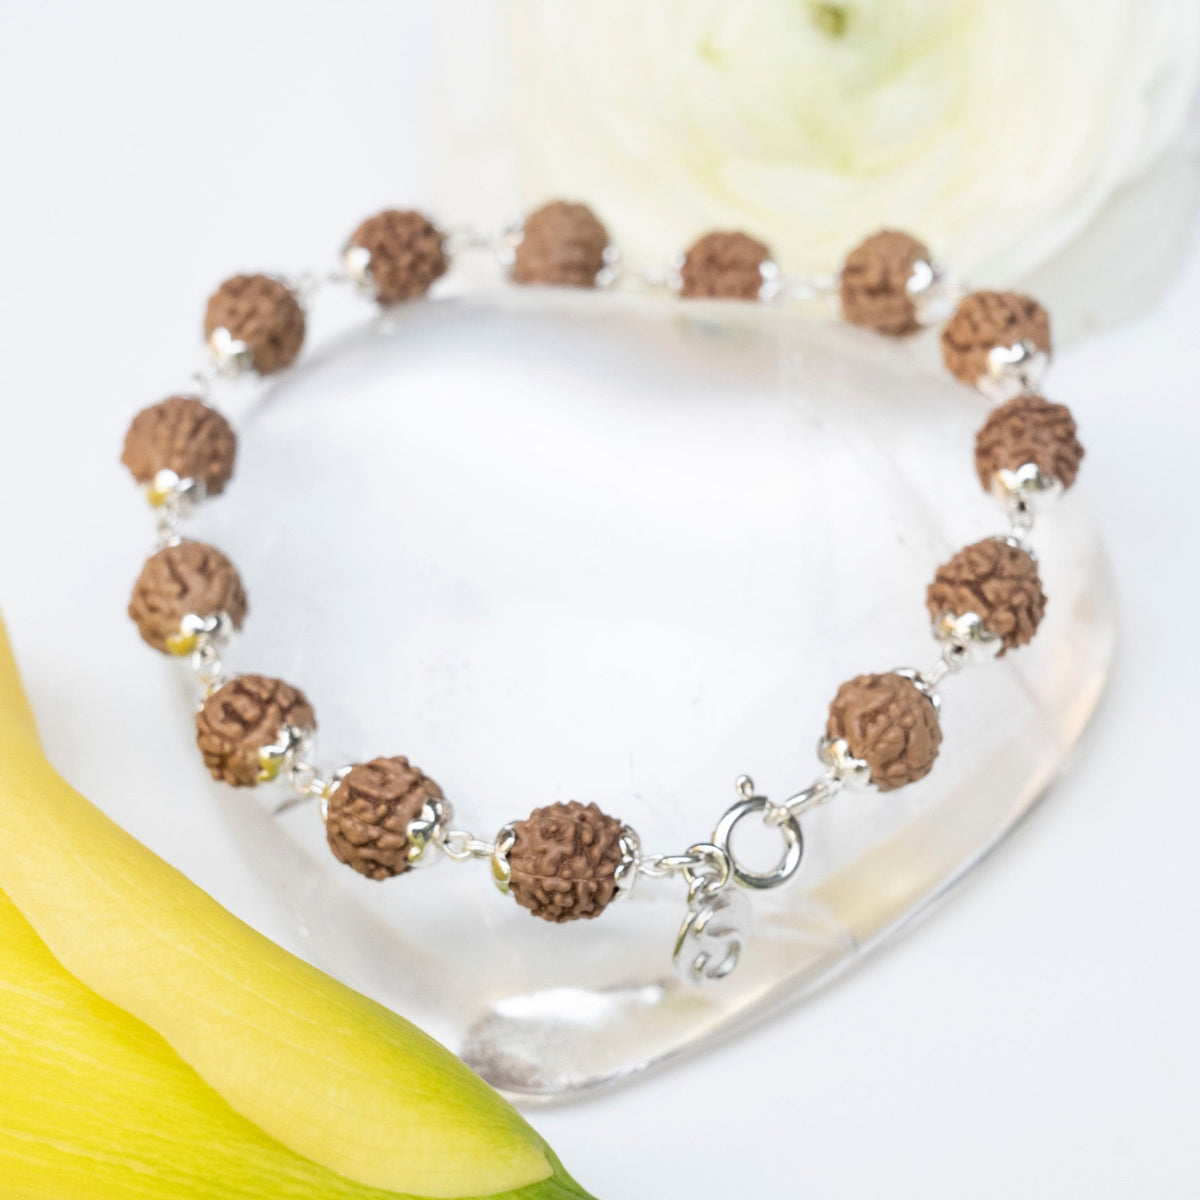 CHANDRA SHEKHRA  One (Shiva) who Holds the Moon Crown | Rudraksha and Sterling Silver